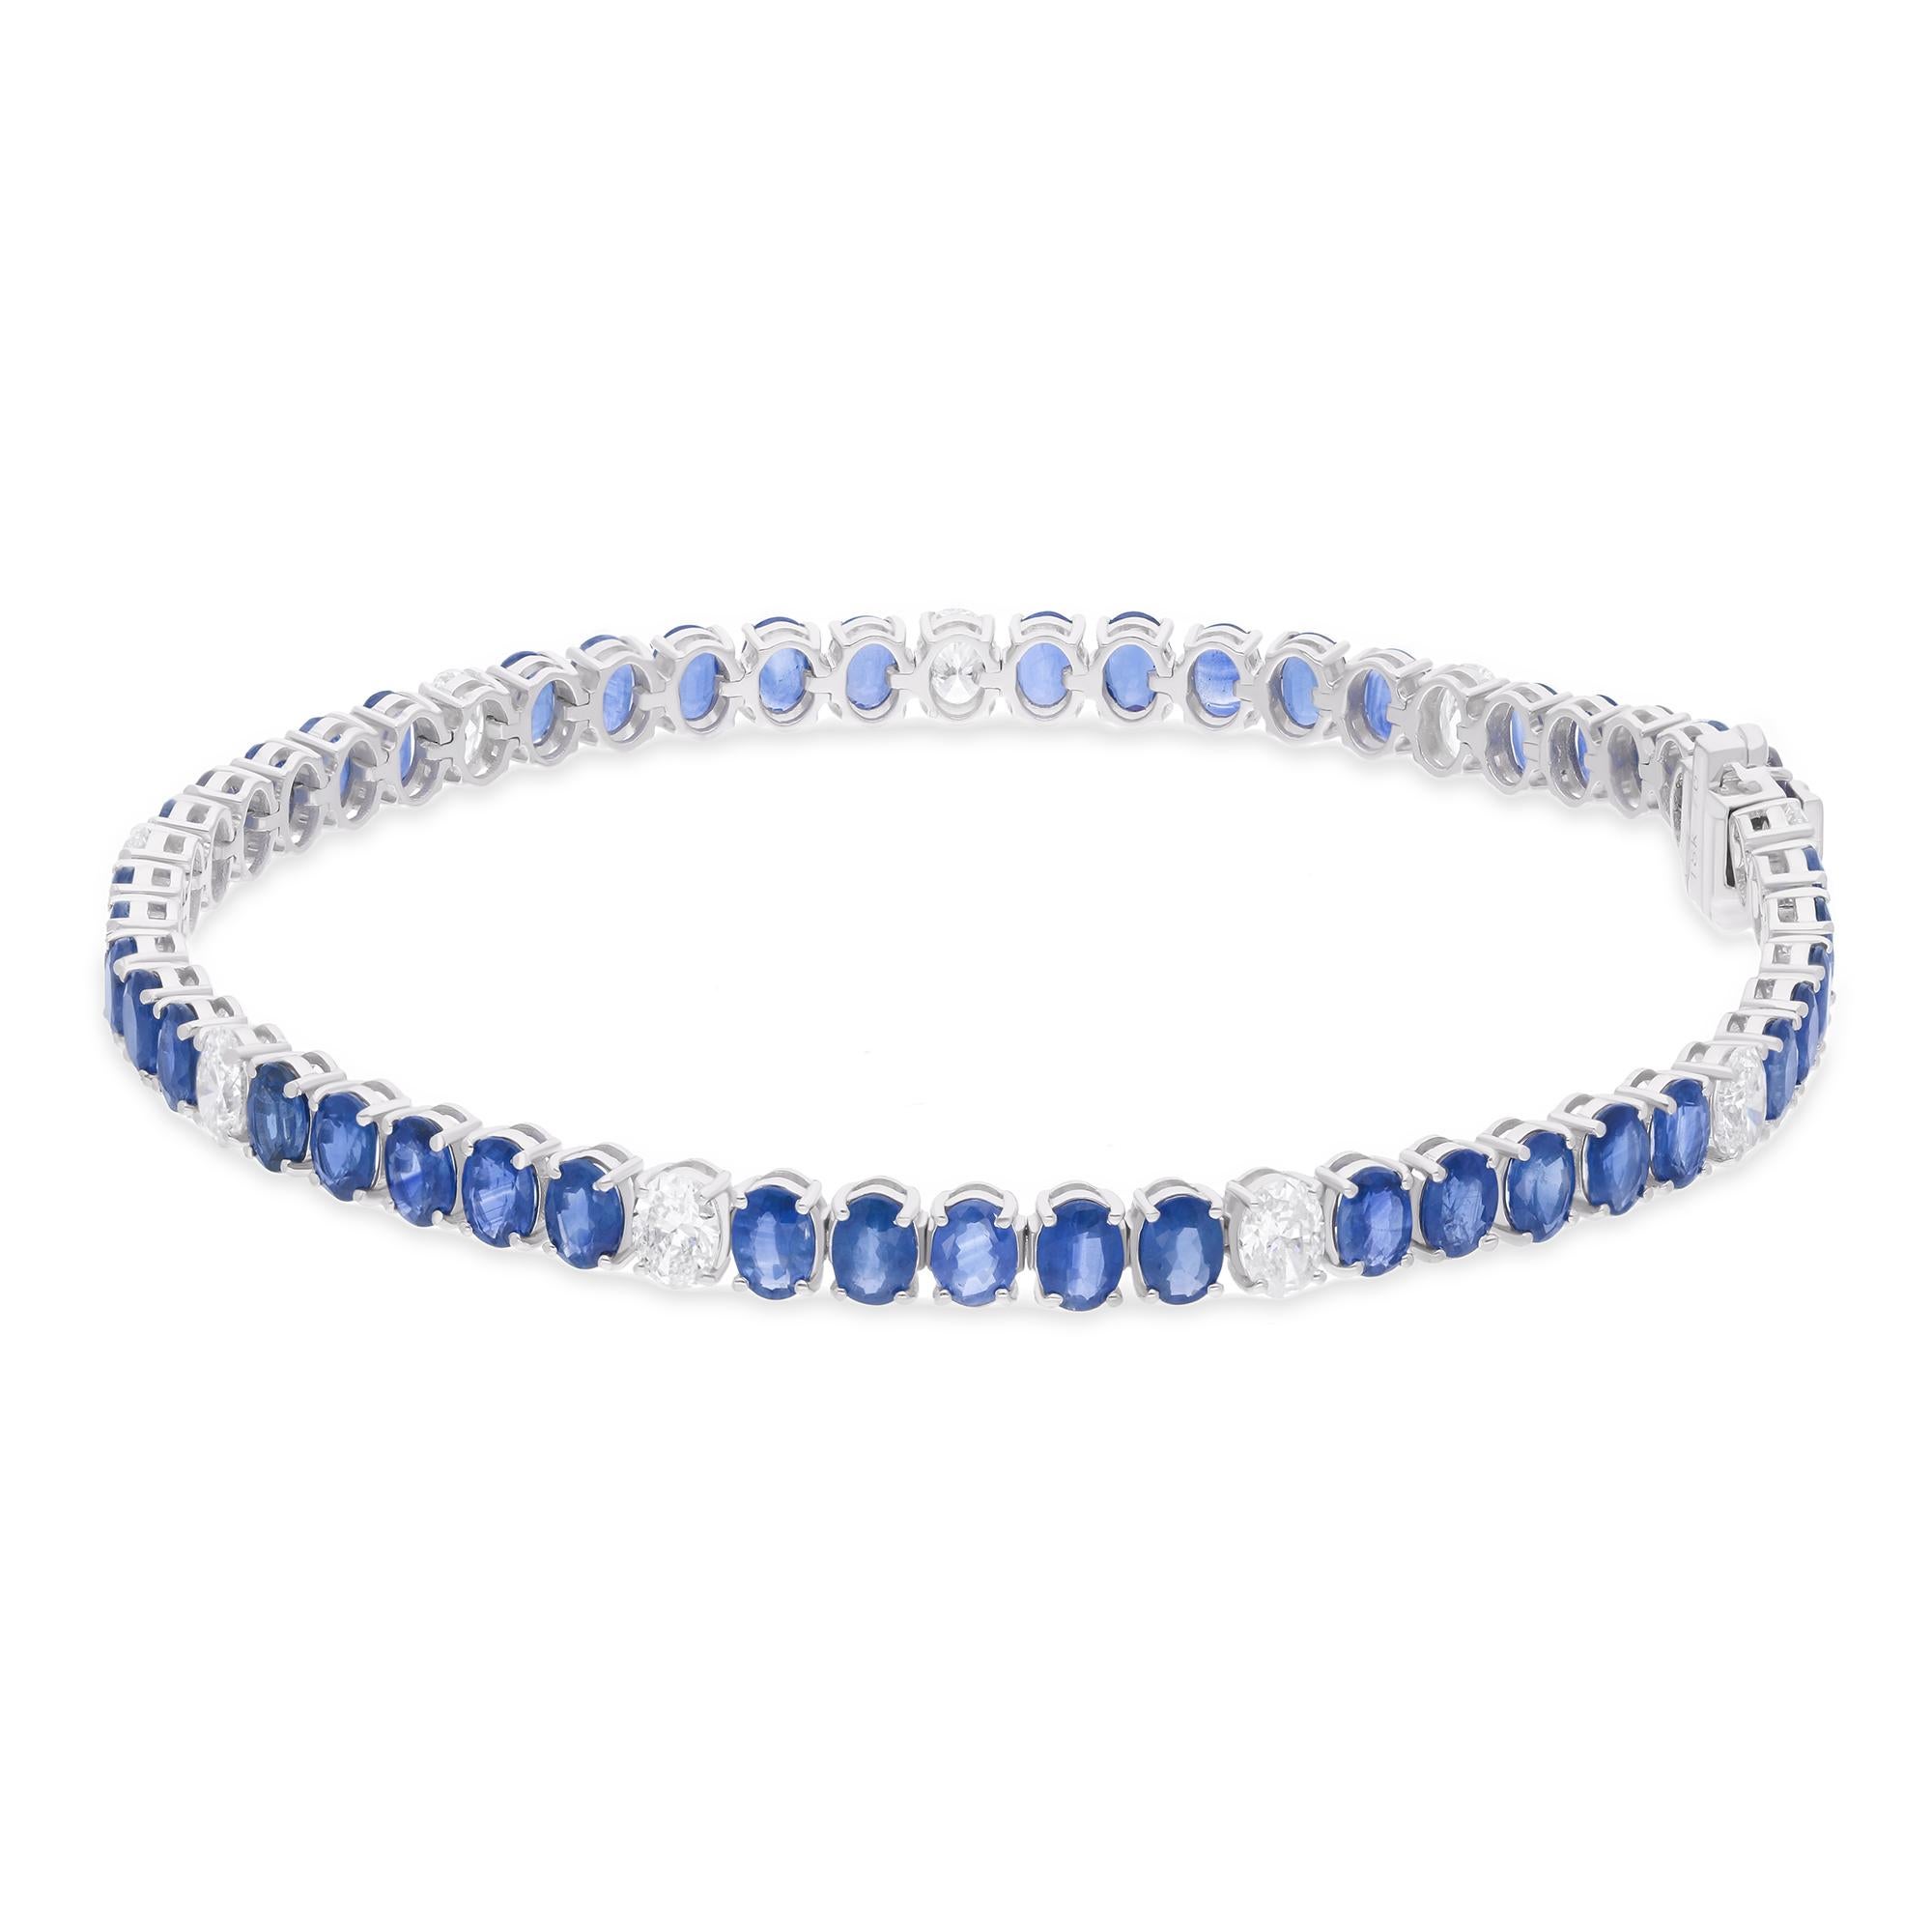 Surrounding the sapphires are sparkling diamonds, adding a touch of brilliance and sophistication to the design. These diamonds are of the highest quality, expertly cut and set to maximize their fire and scintillation, creating a dazzling display of